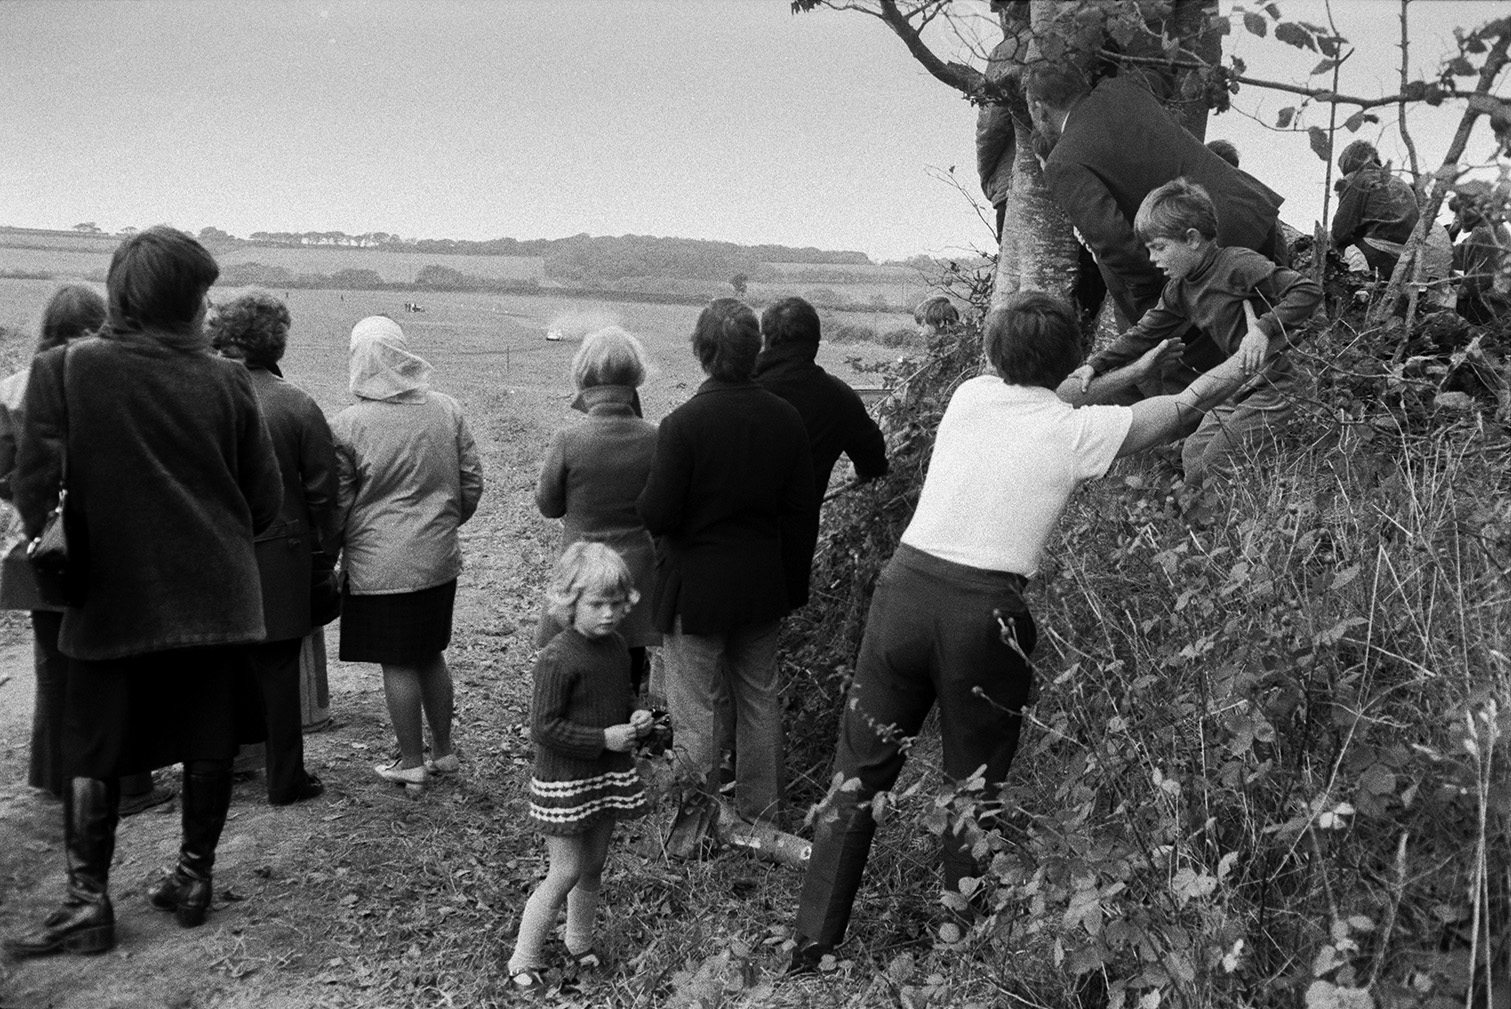 Spectators watching banger car racing at Sugworthy. A man is helping a child down from a hedge where he has been stood to get a better view. The bangers cars can be seen on a track in the distance.